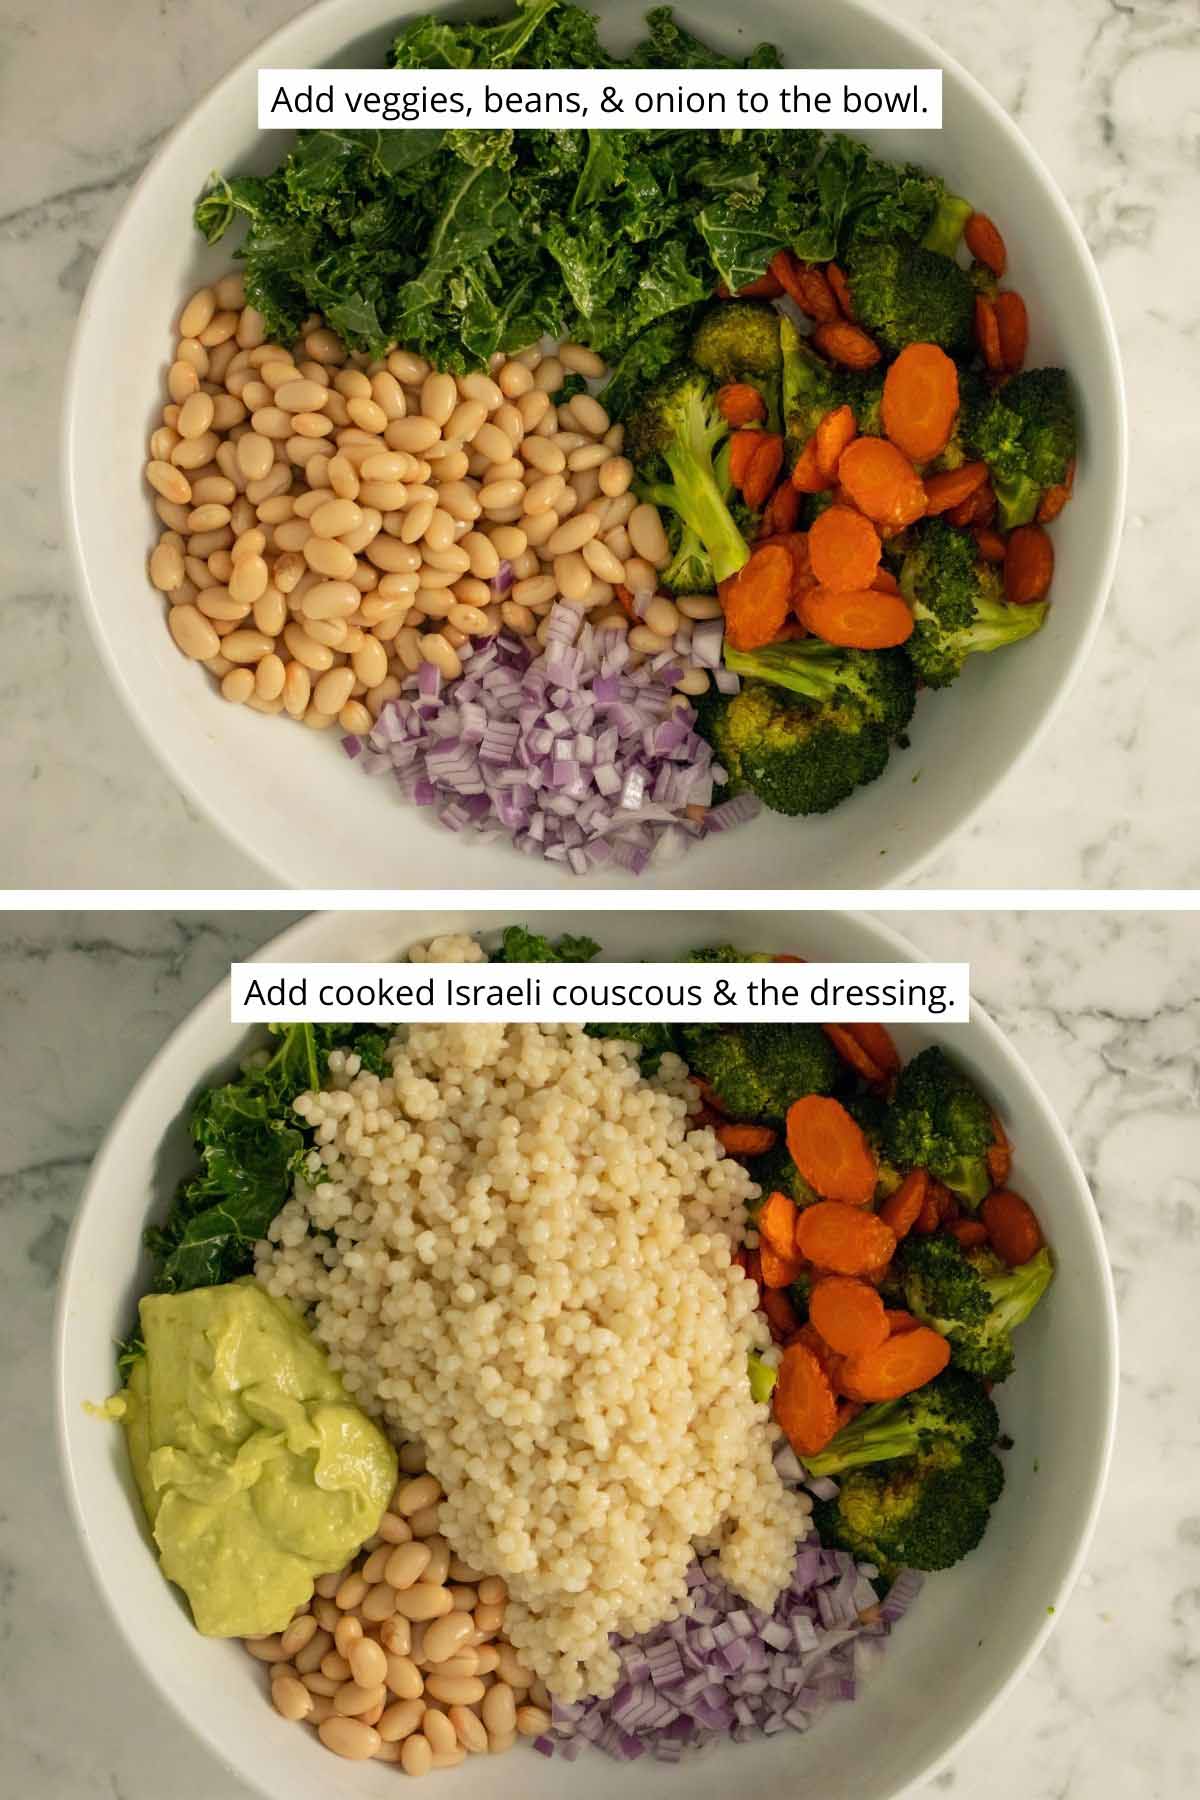 image collage showing the beans and veggies in a mixing bowl and adding the avocado dressing and Israeli couscous